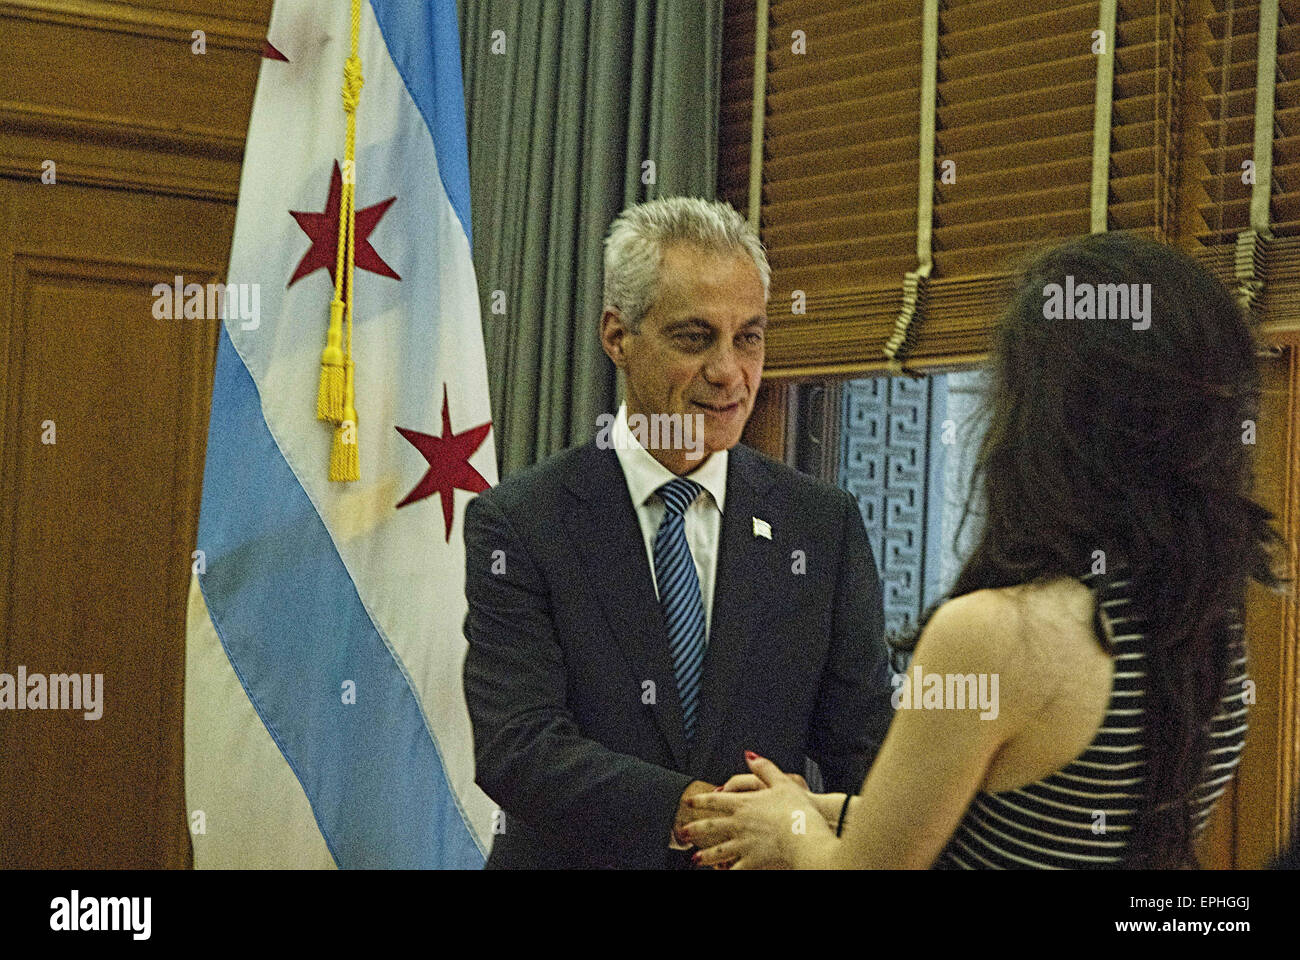 Chicago, Illinois, USA. 18th May, 2015. Mayor Rahm Emanuel with his wife Amy Rule greet the public on inauguration day May 18, 2015 for the Mayor's second -four year term. Emahuel opened the doors to his office at City Hall to meet his constituents one by one. A long line of people waited to meet the couple and to pose for pictures. In the morning, the Mayor was inaugurated at the Chicago Theater sharing the stage with President Bill Clinton and the newly elected Chicago aldermen. © Karen I. Hirsch/ZUMA Wire/ZUMAPRESS.com/Alamy Live News Stock Photo